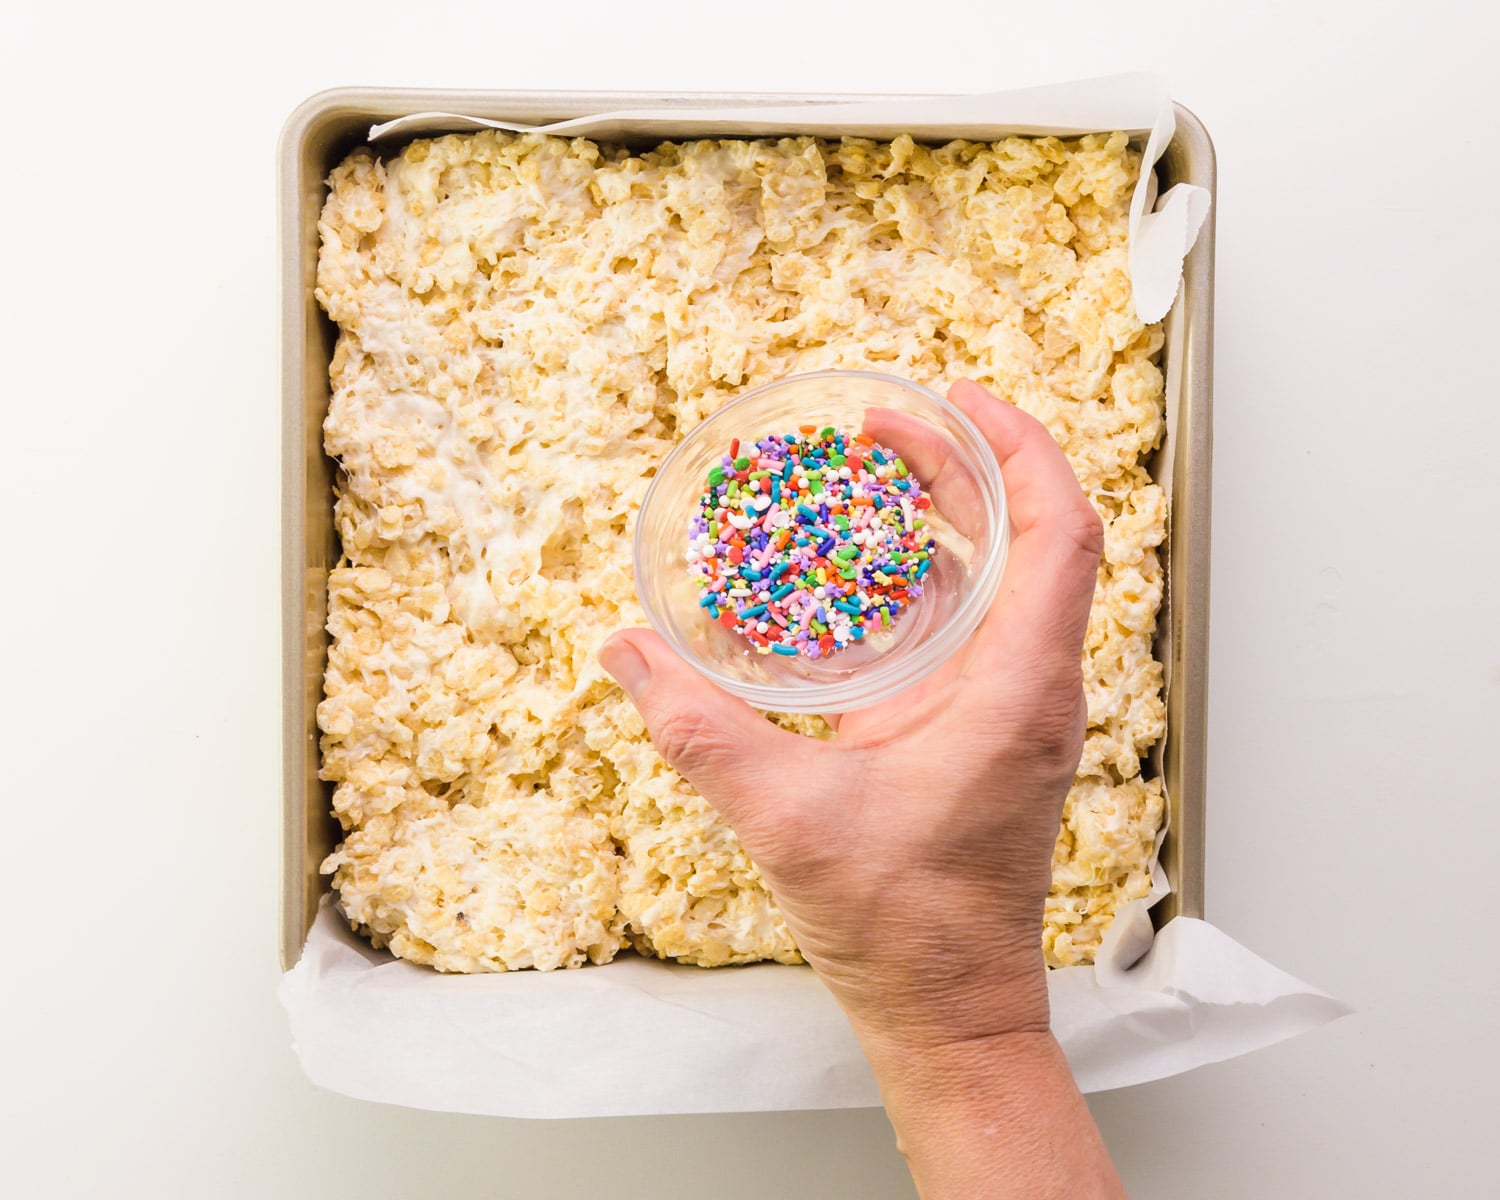 A hand holds a bowl of vegan rice krispies sprinkled on a pan.